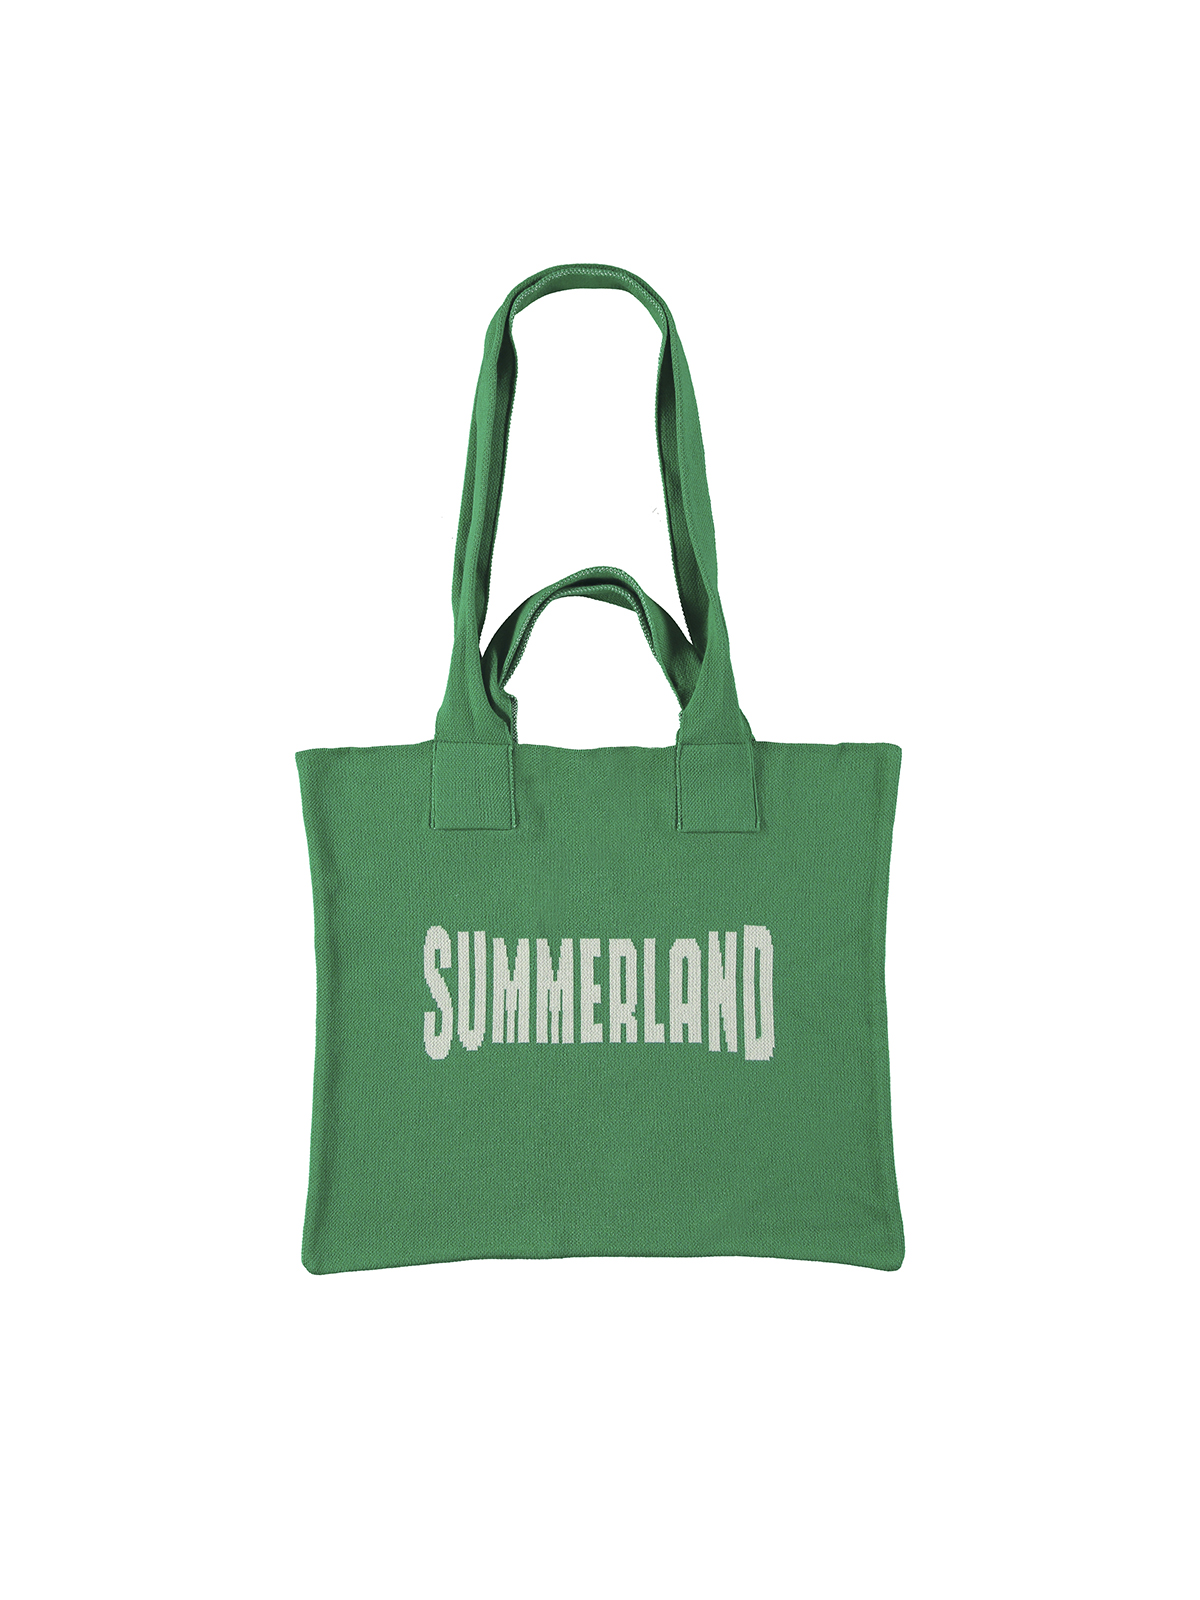 SUMMERLAND TRICOT TOTE BAG